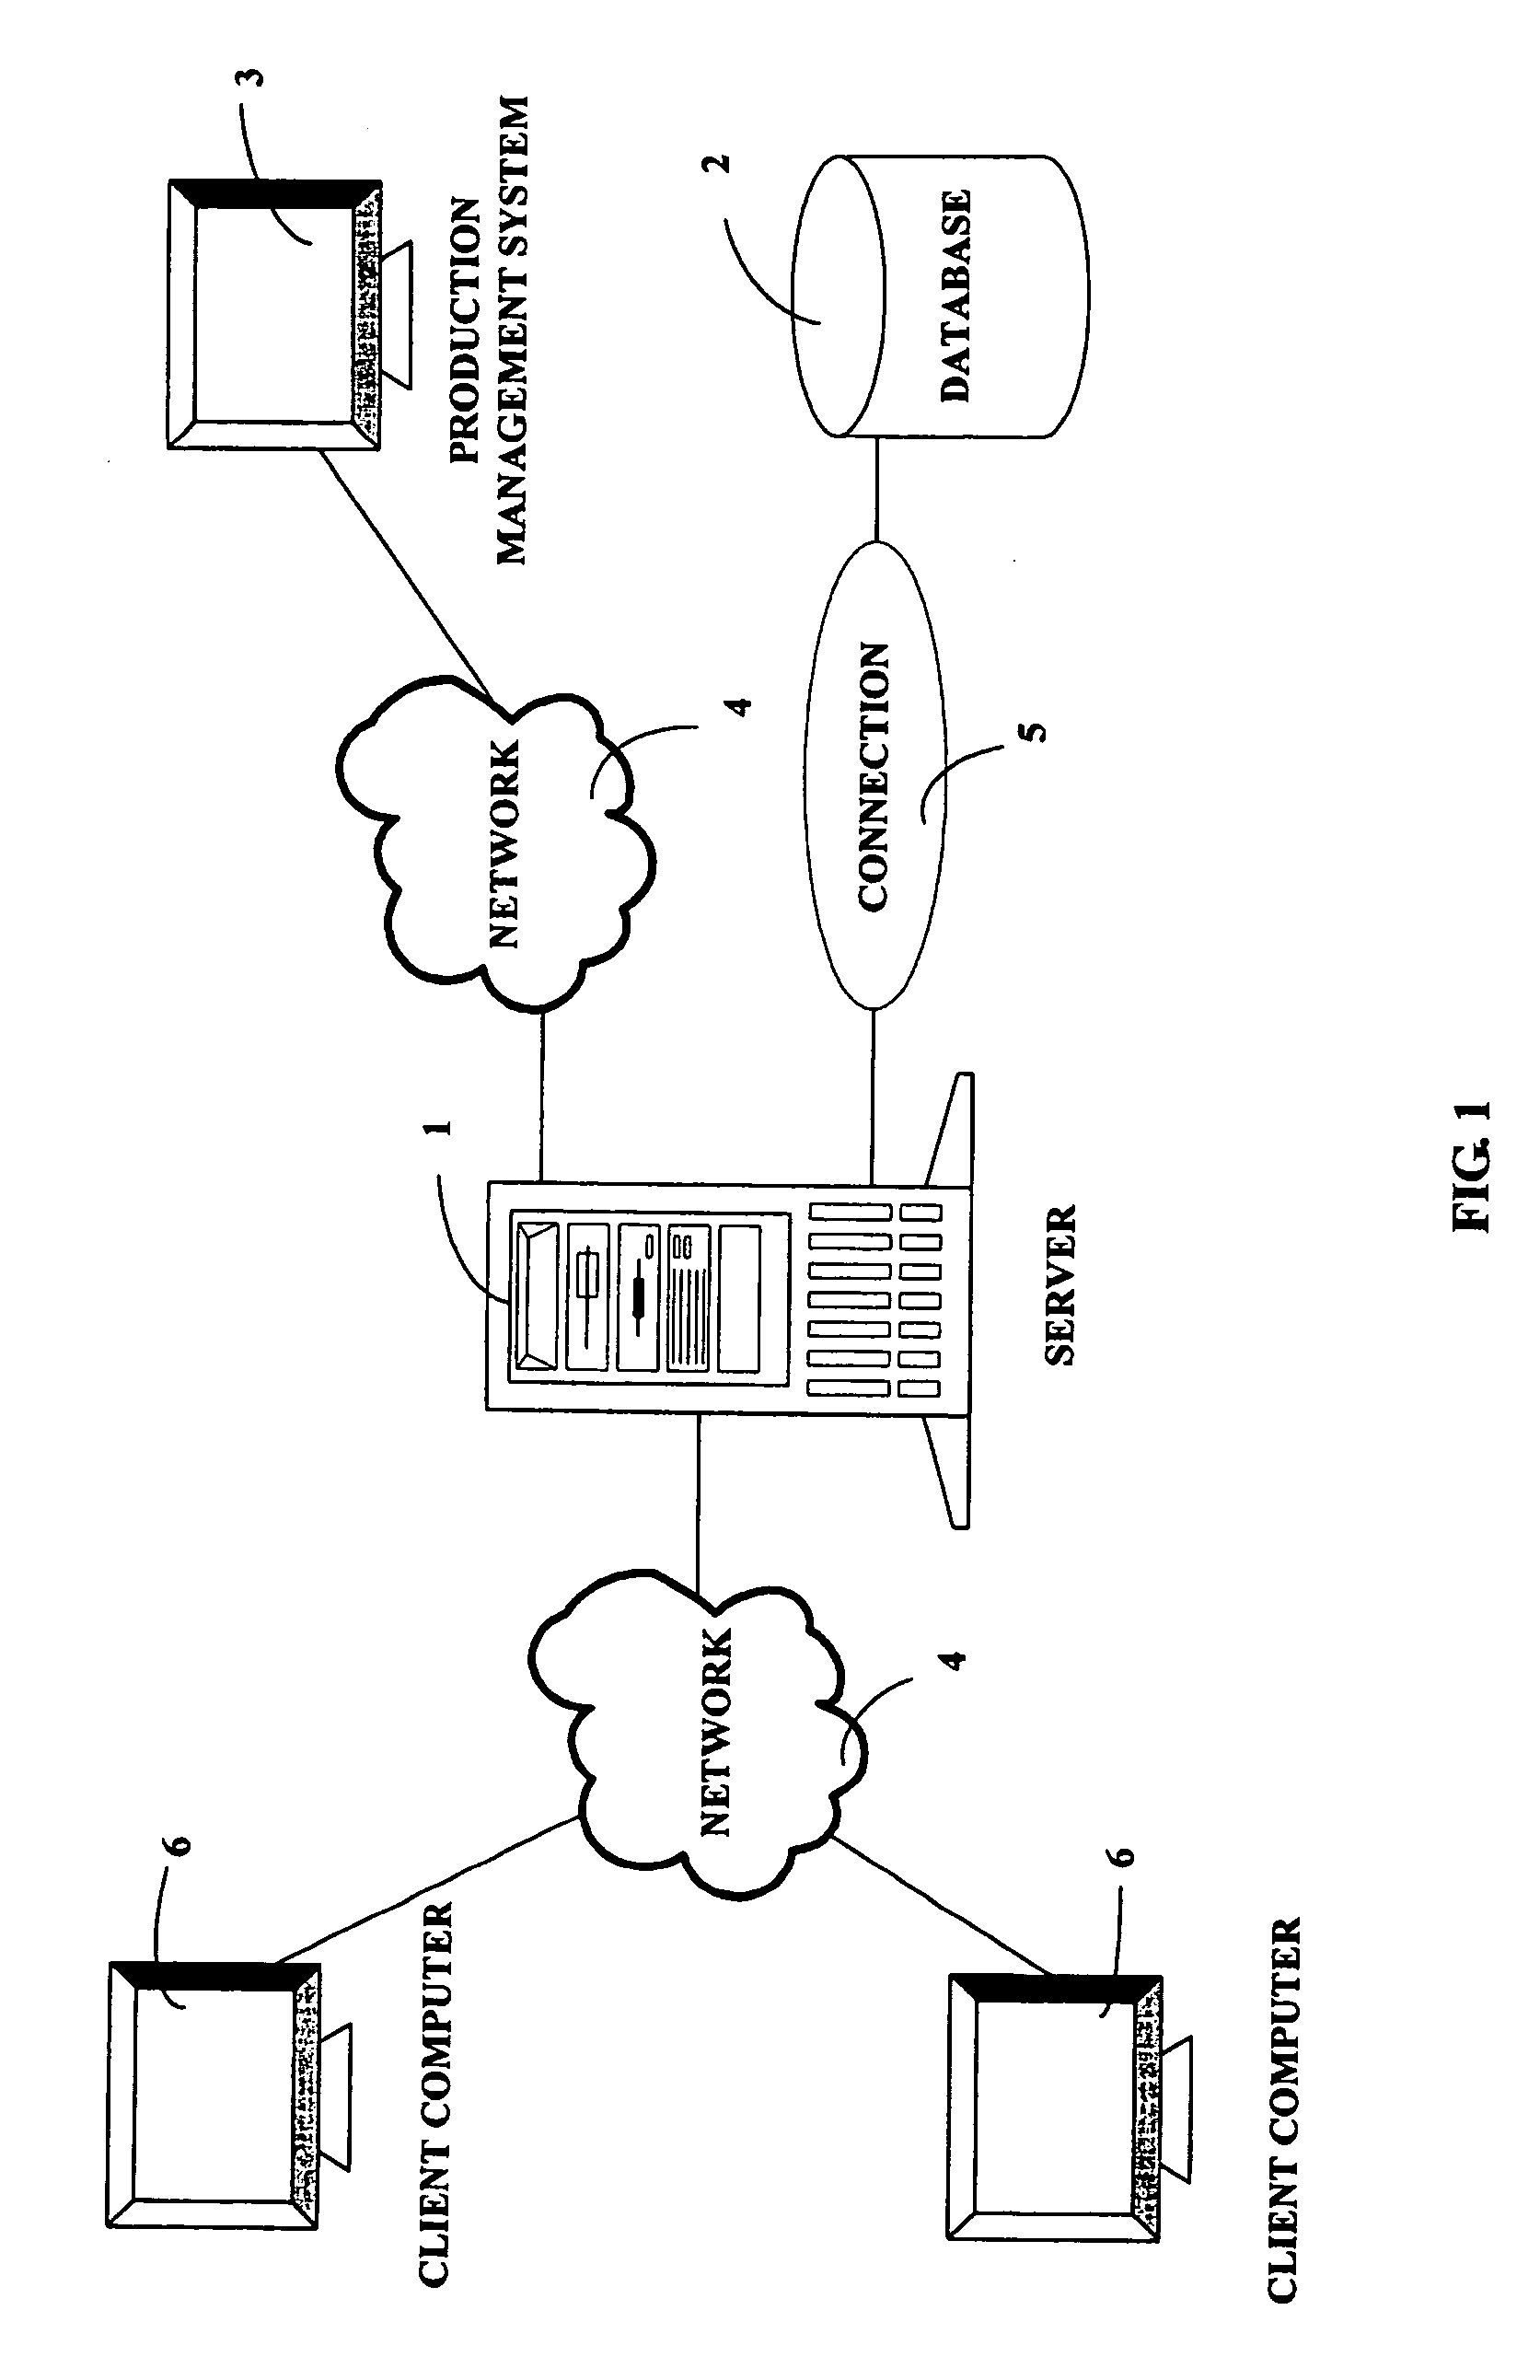 Computer-aided manufacturing system and method for sheet-metal punching